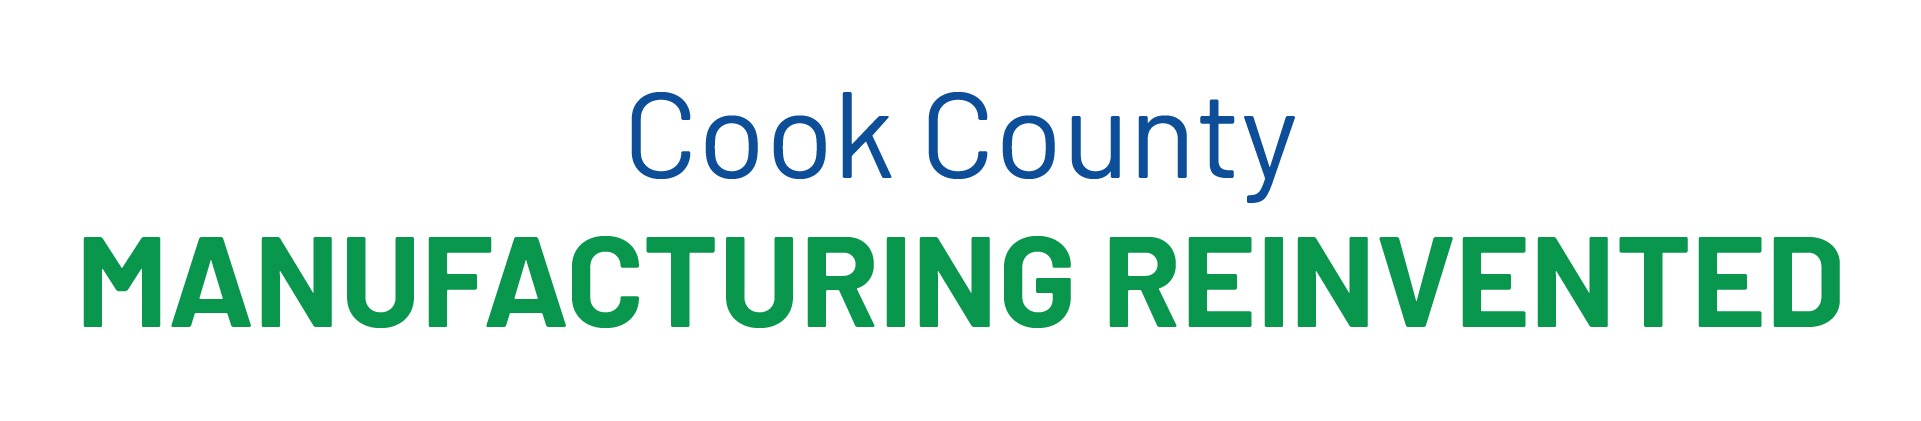 Cook County: Manufacturing Reinvented